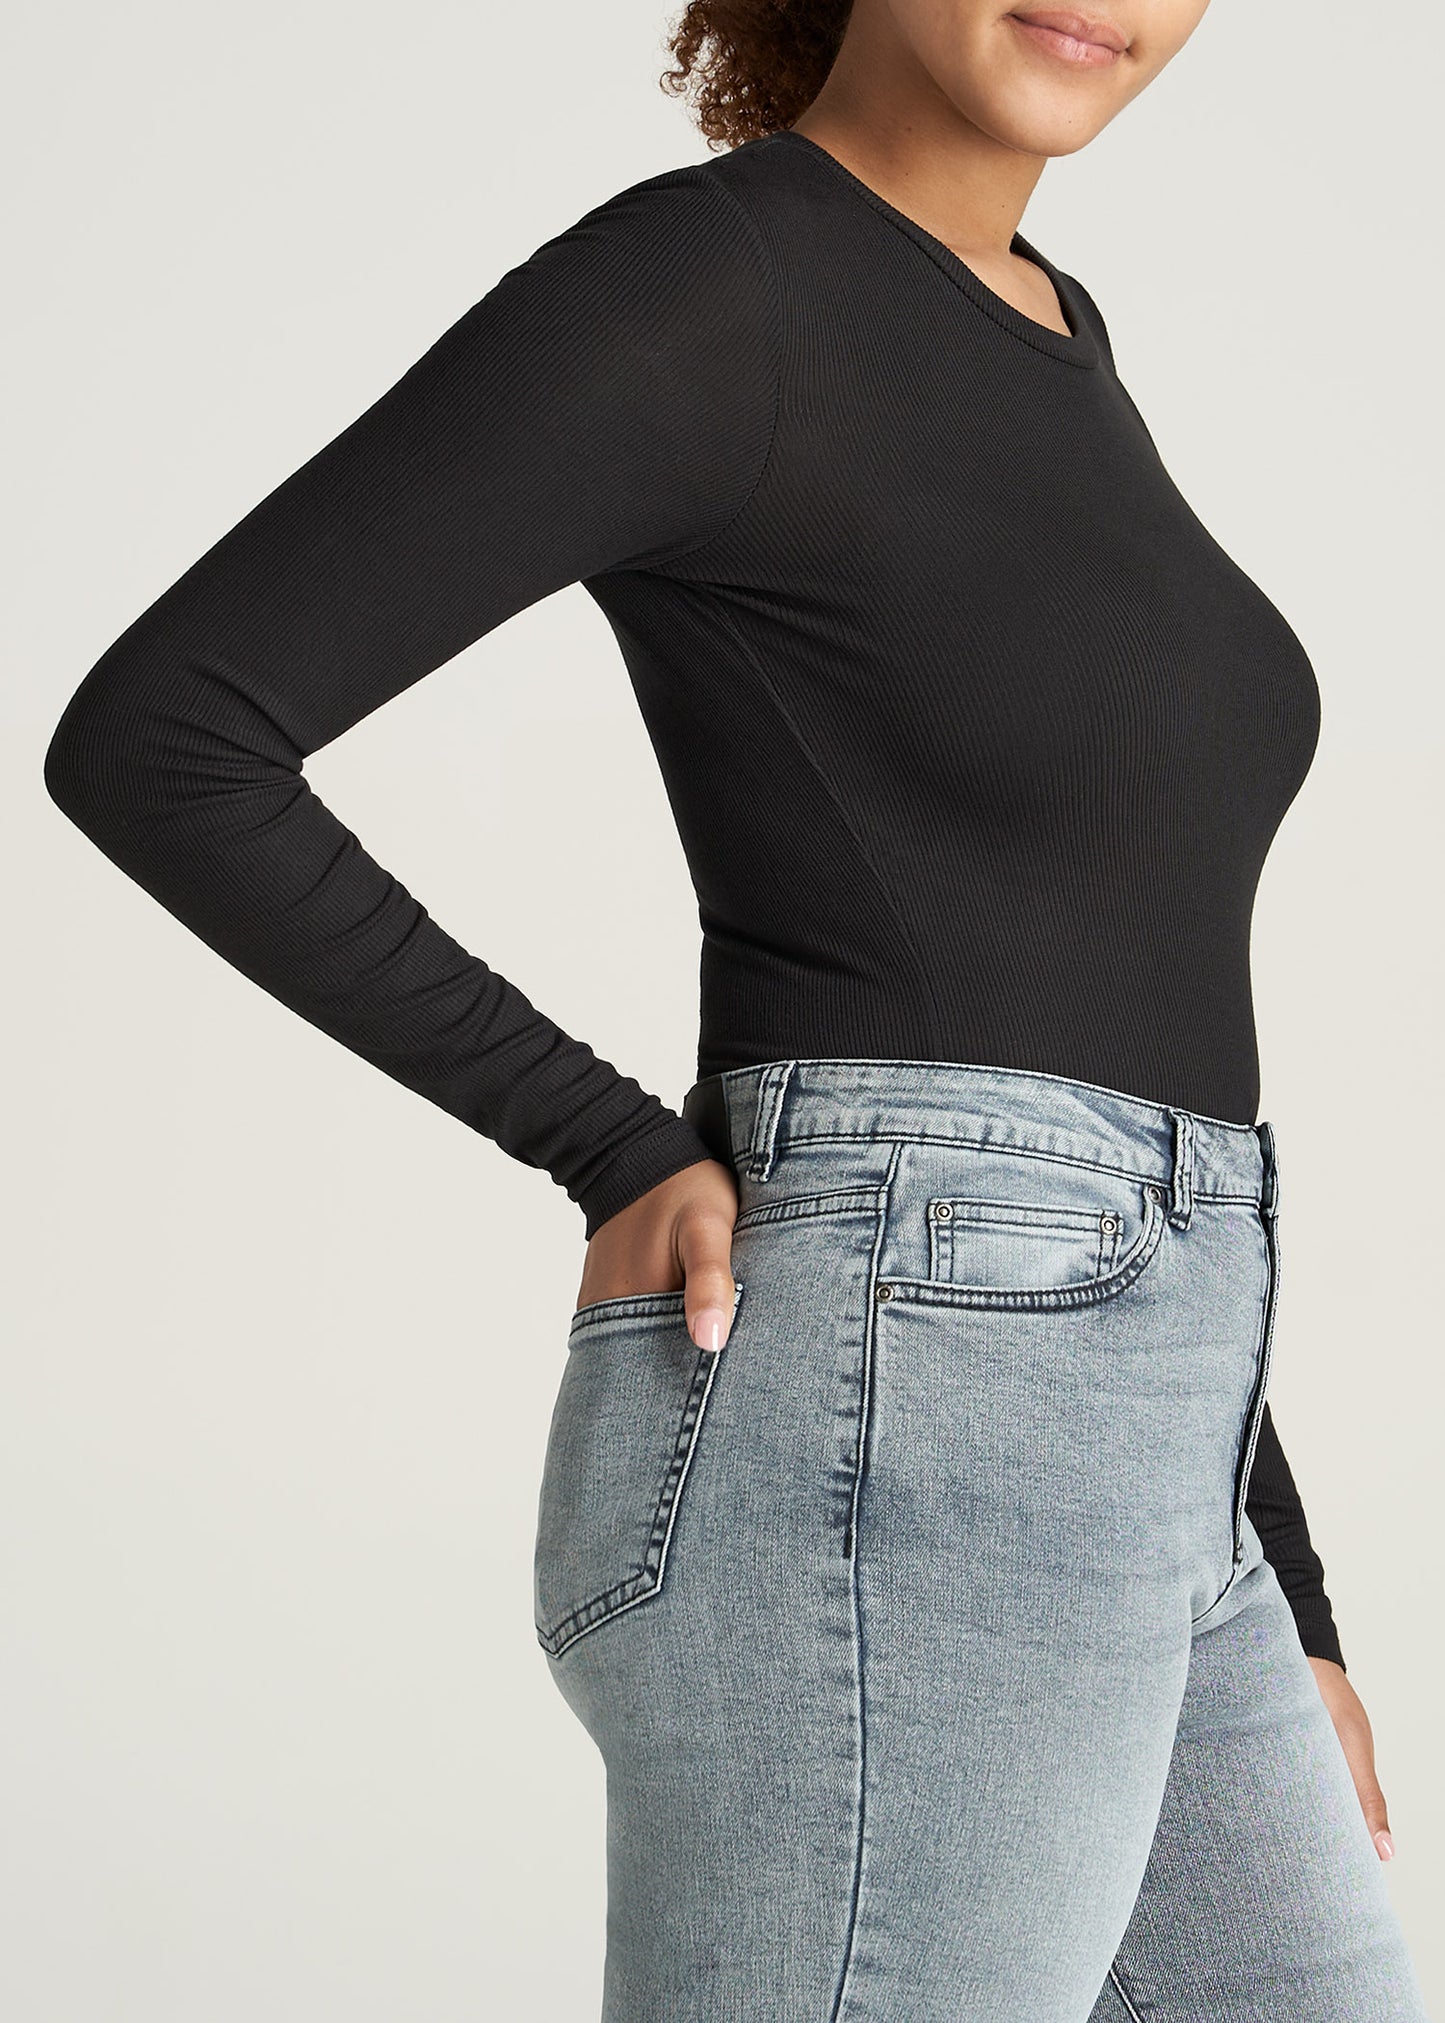       American-Tall-Women-Fitted-Ribbed-LongSleeve-Black-side